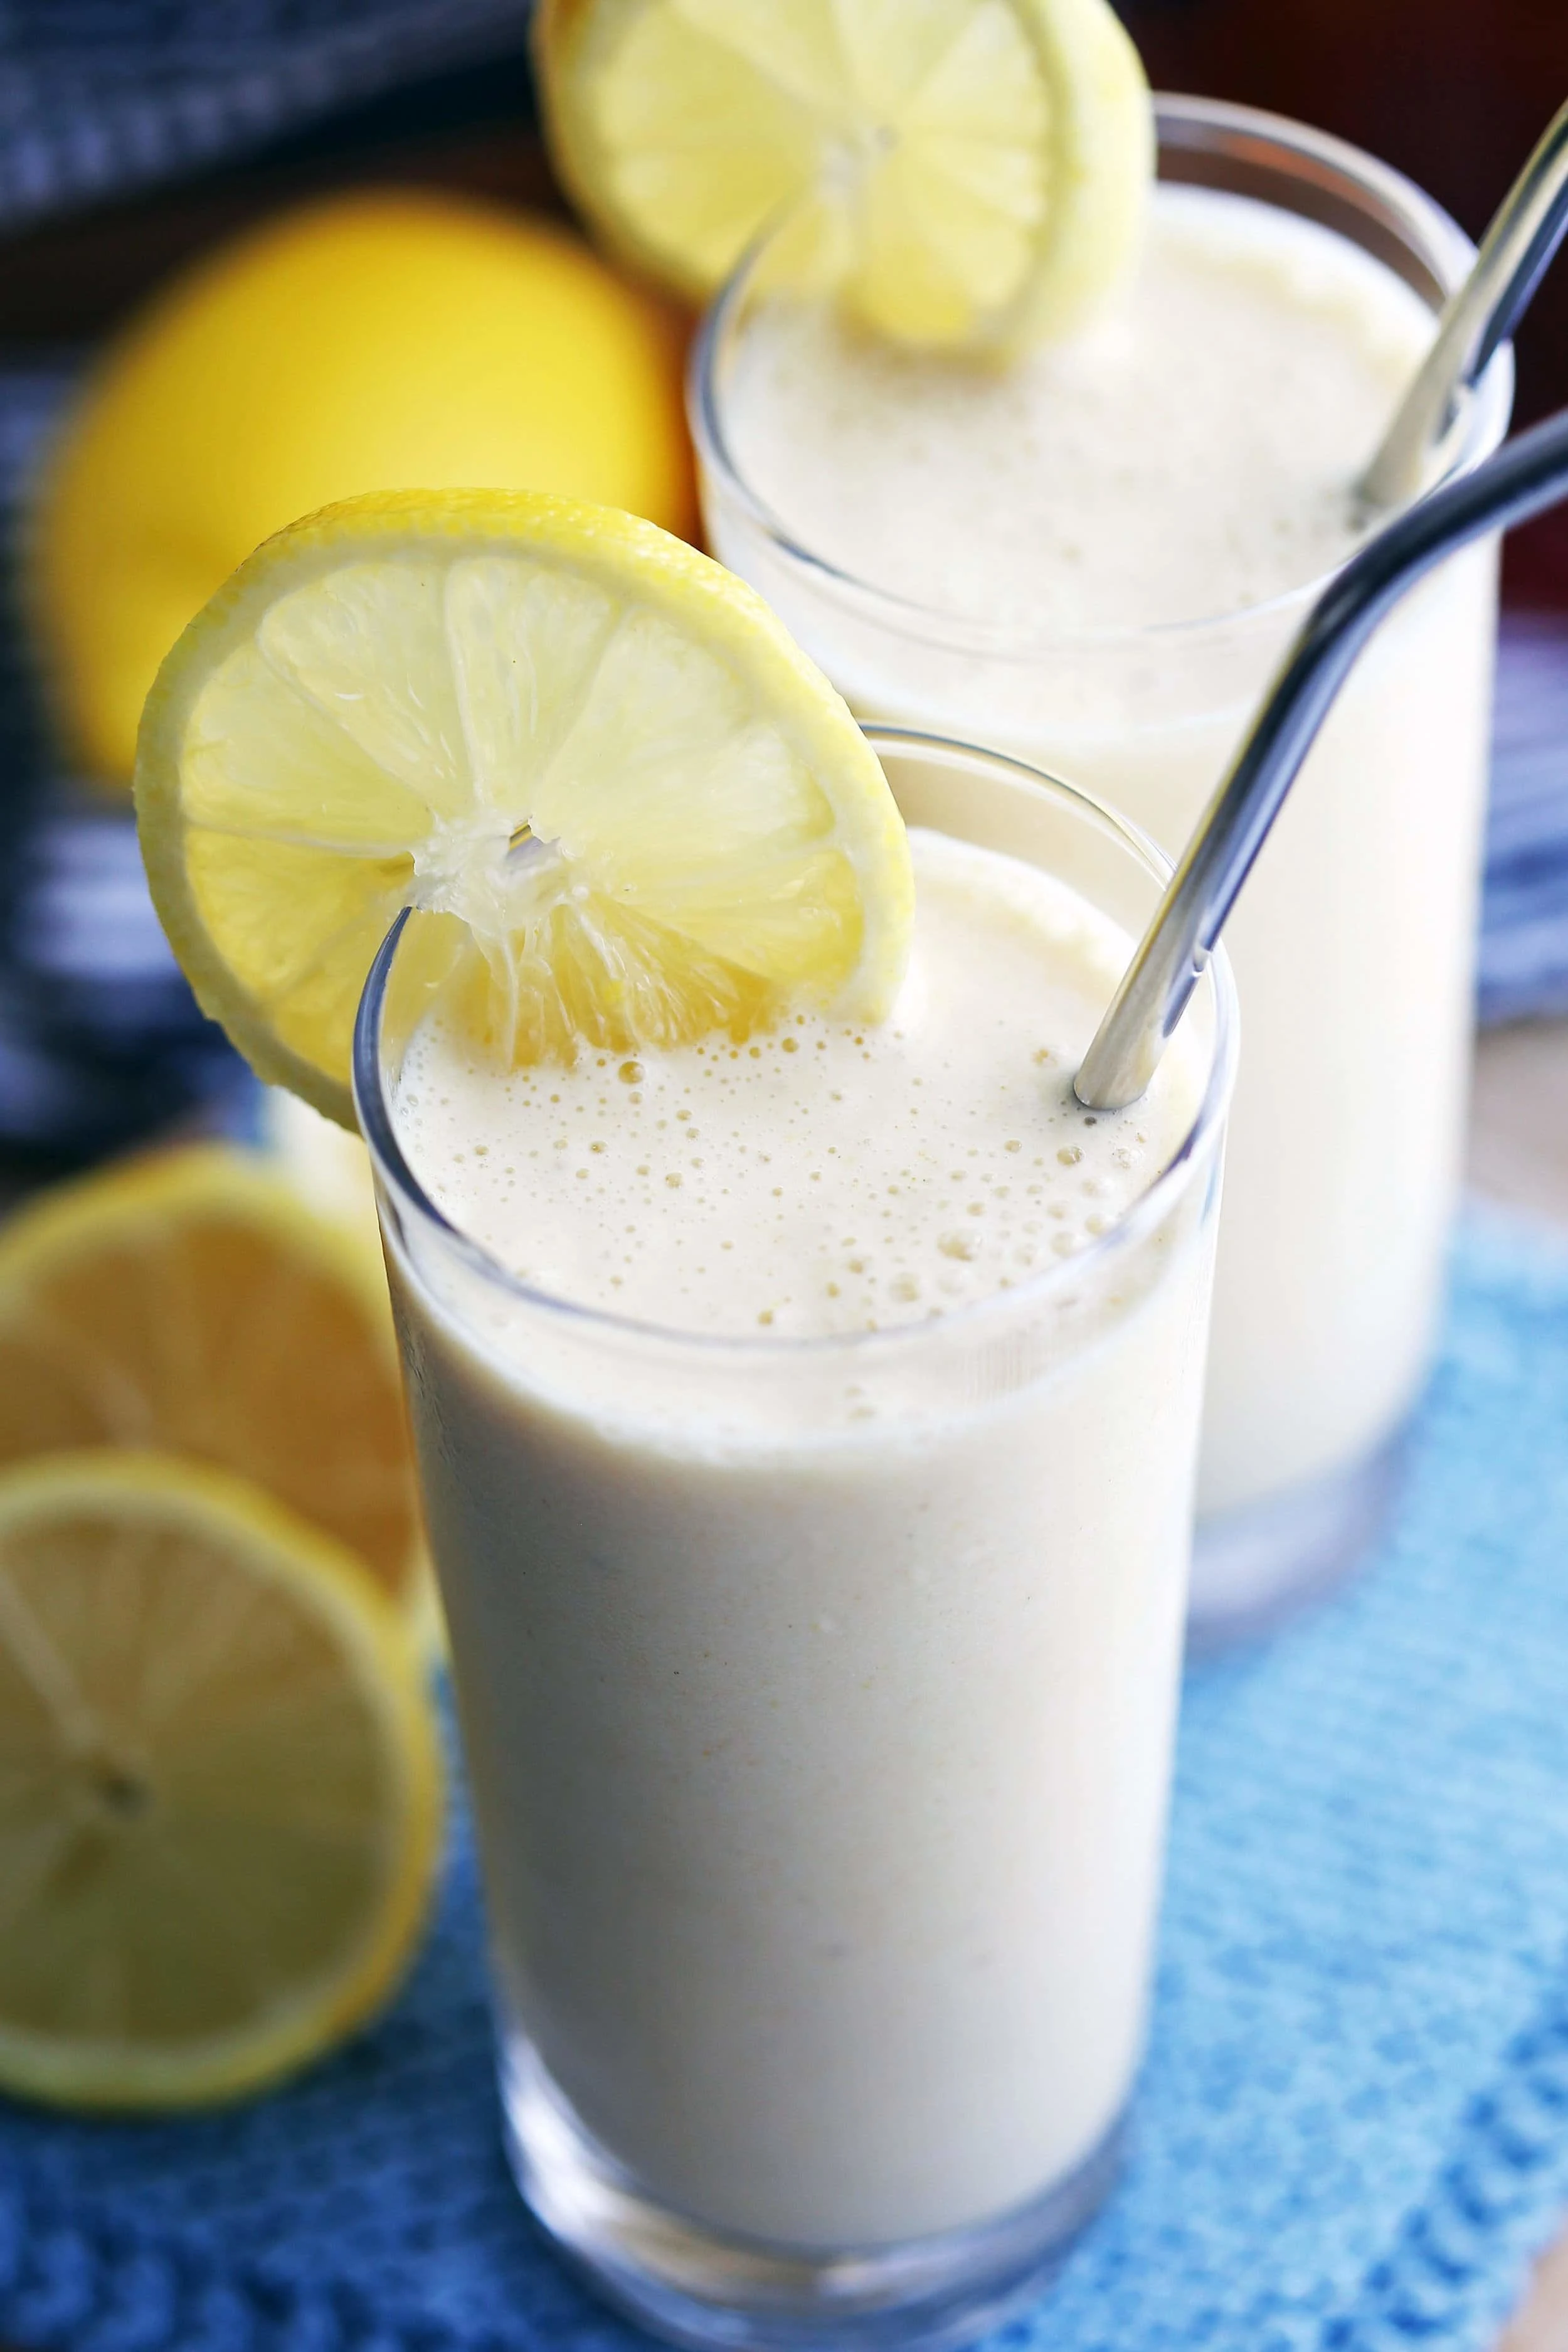 A closeup of lemon pineapple smoothie in a tall glass with metal straw and lemon garnish with another similar glass behind it.